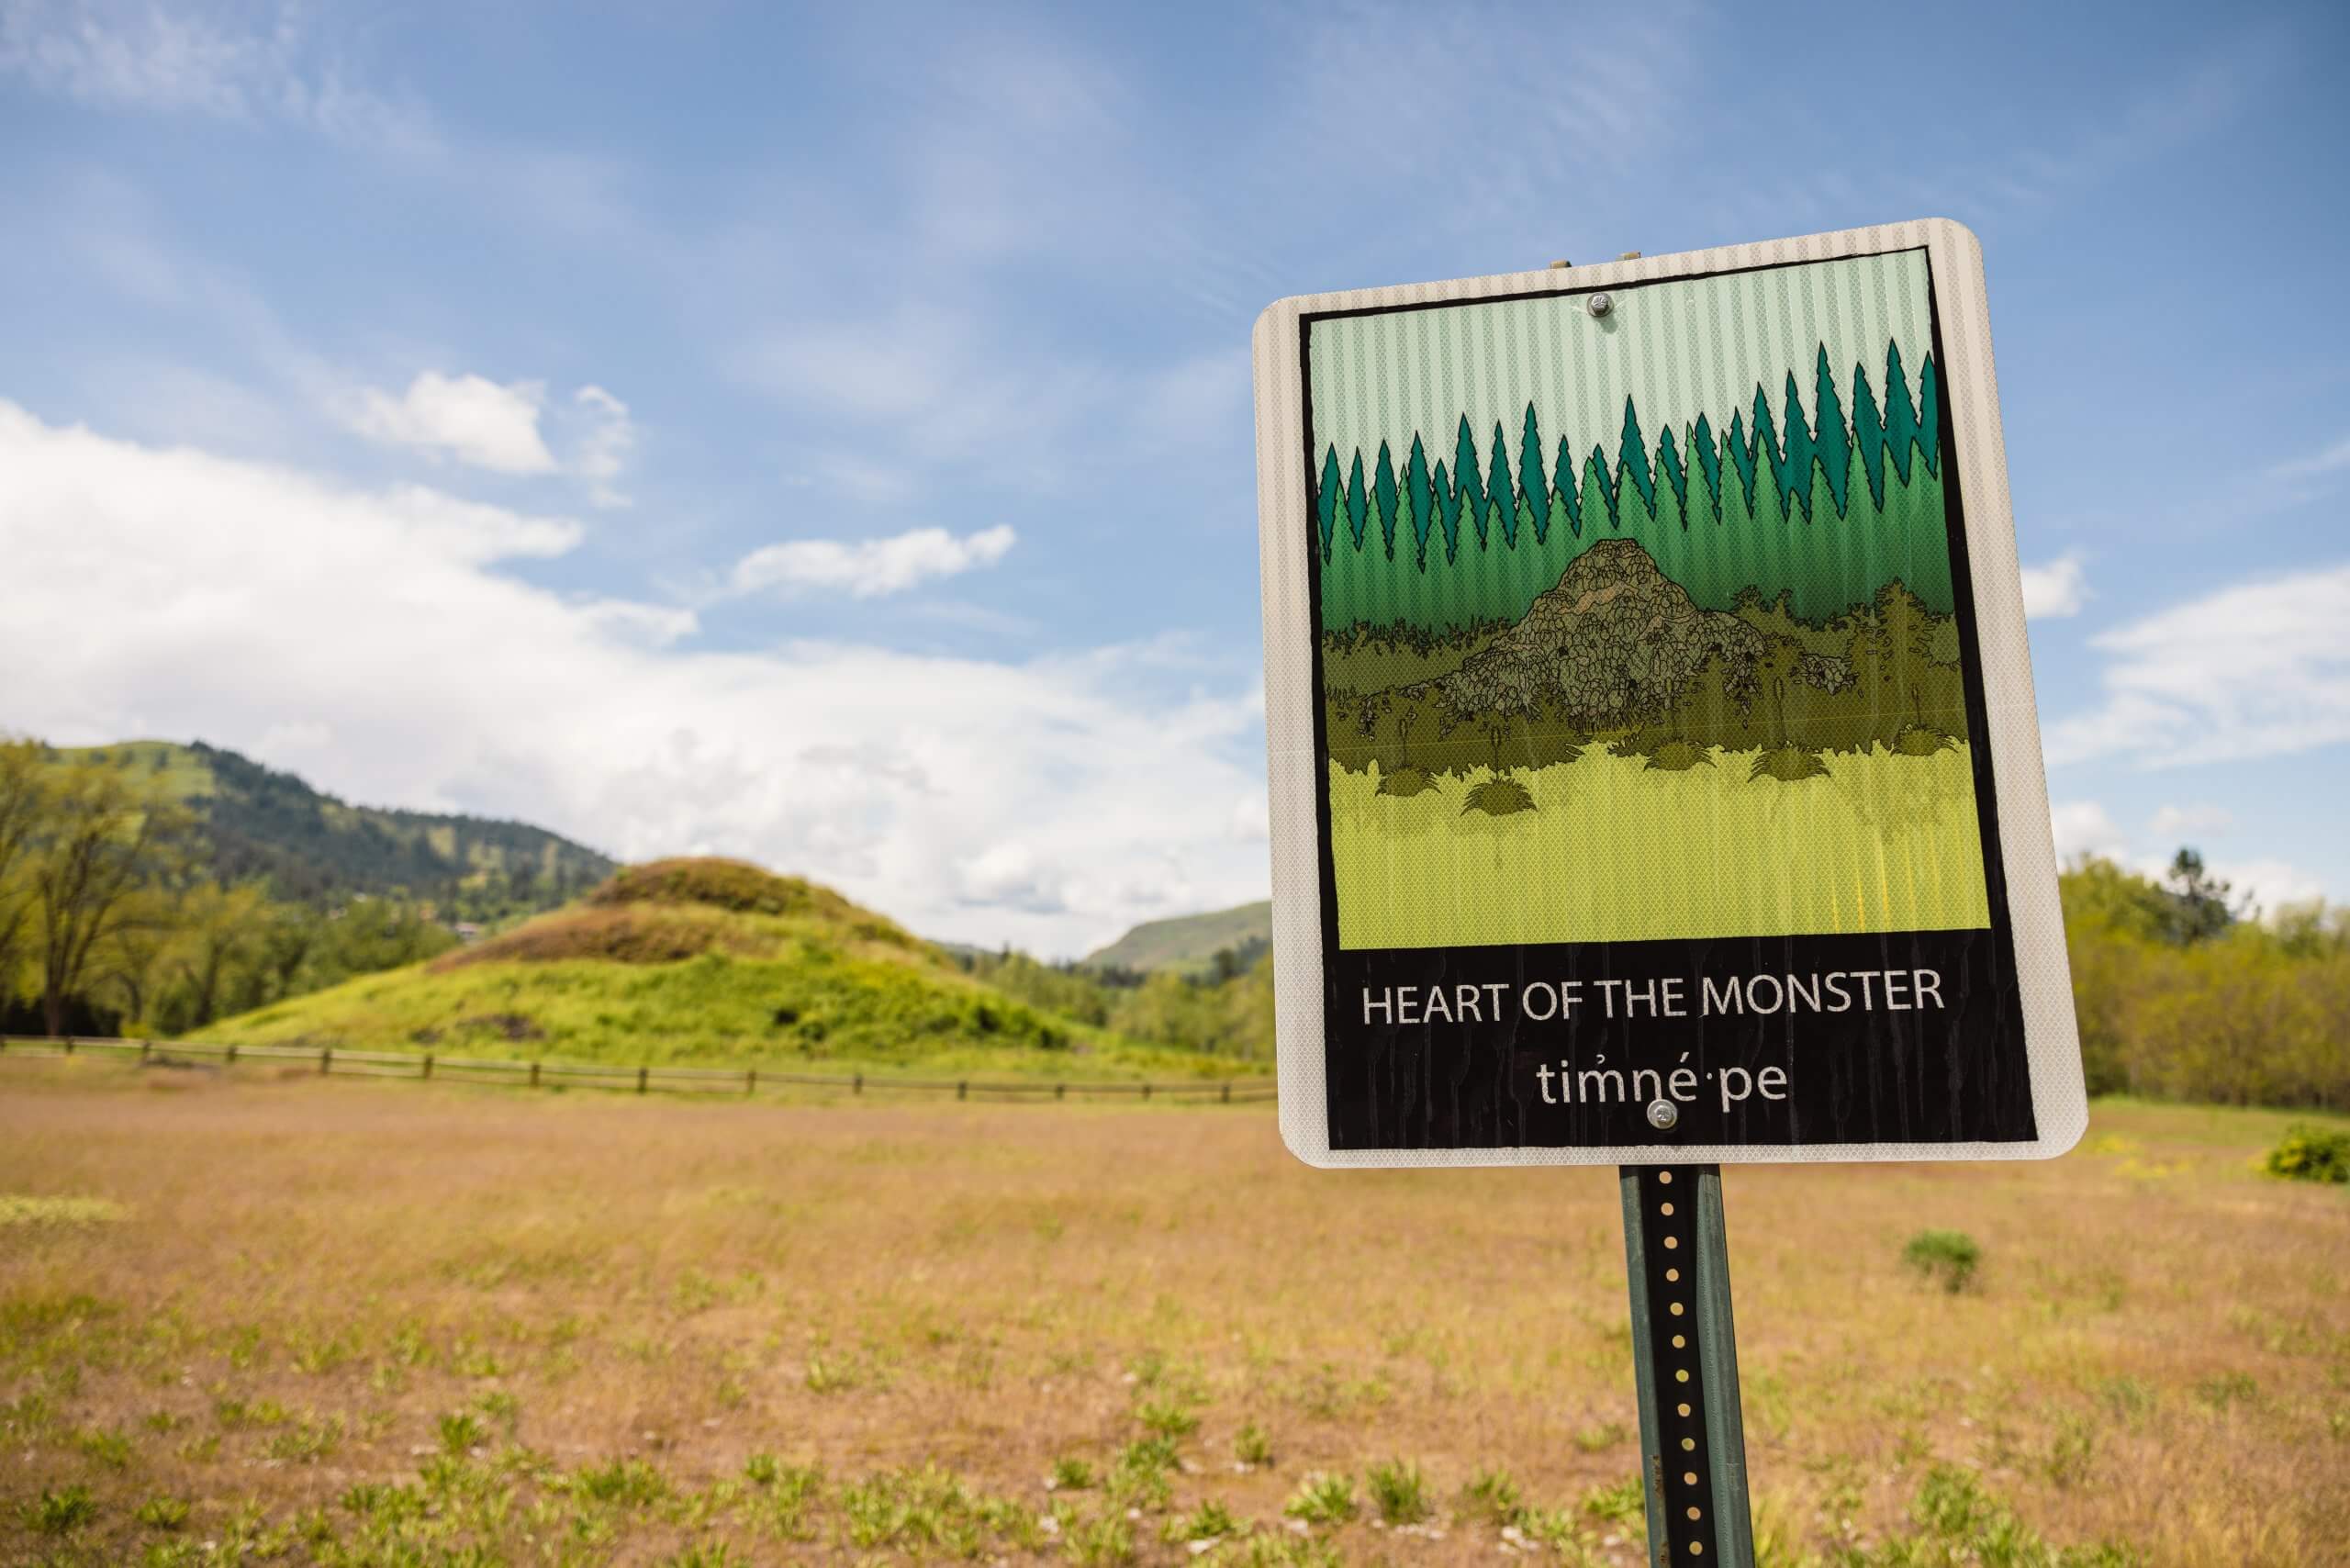 Signage for the Heart of the Monster.